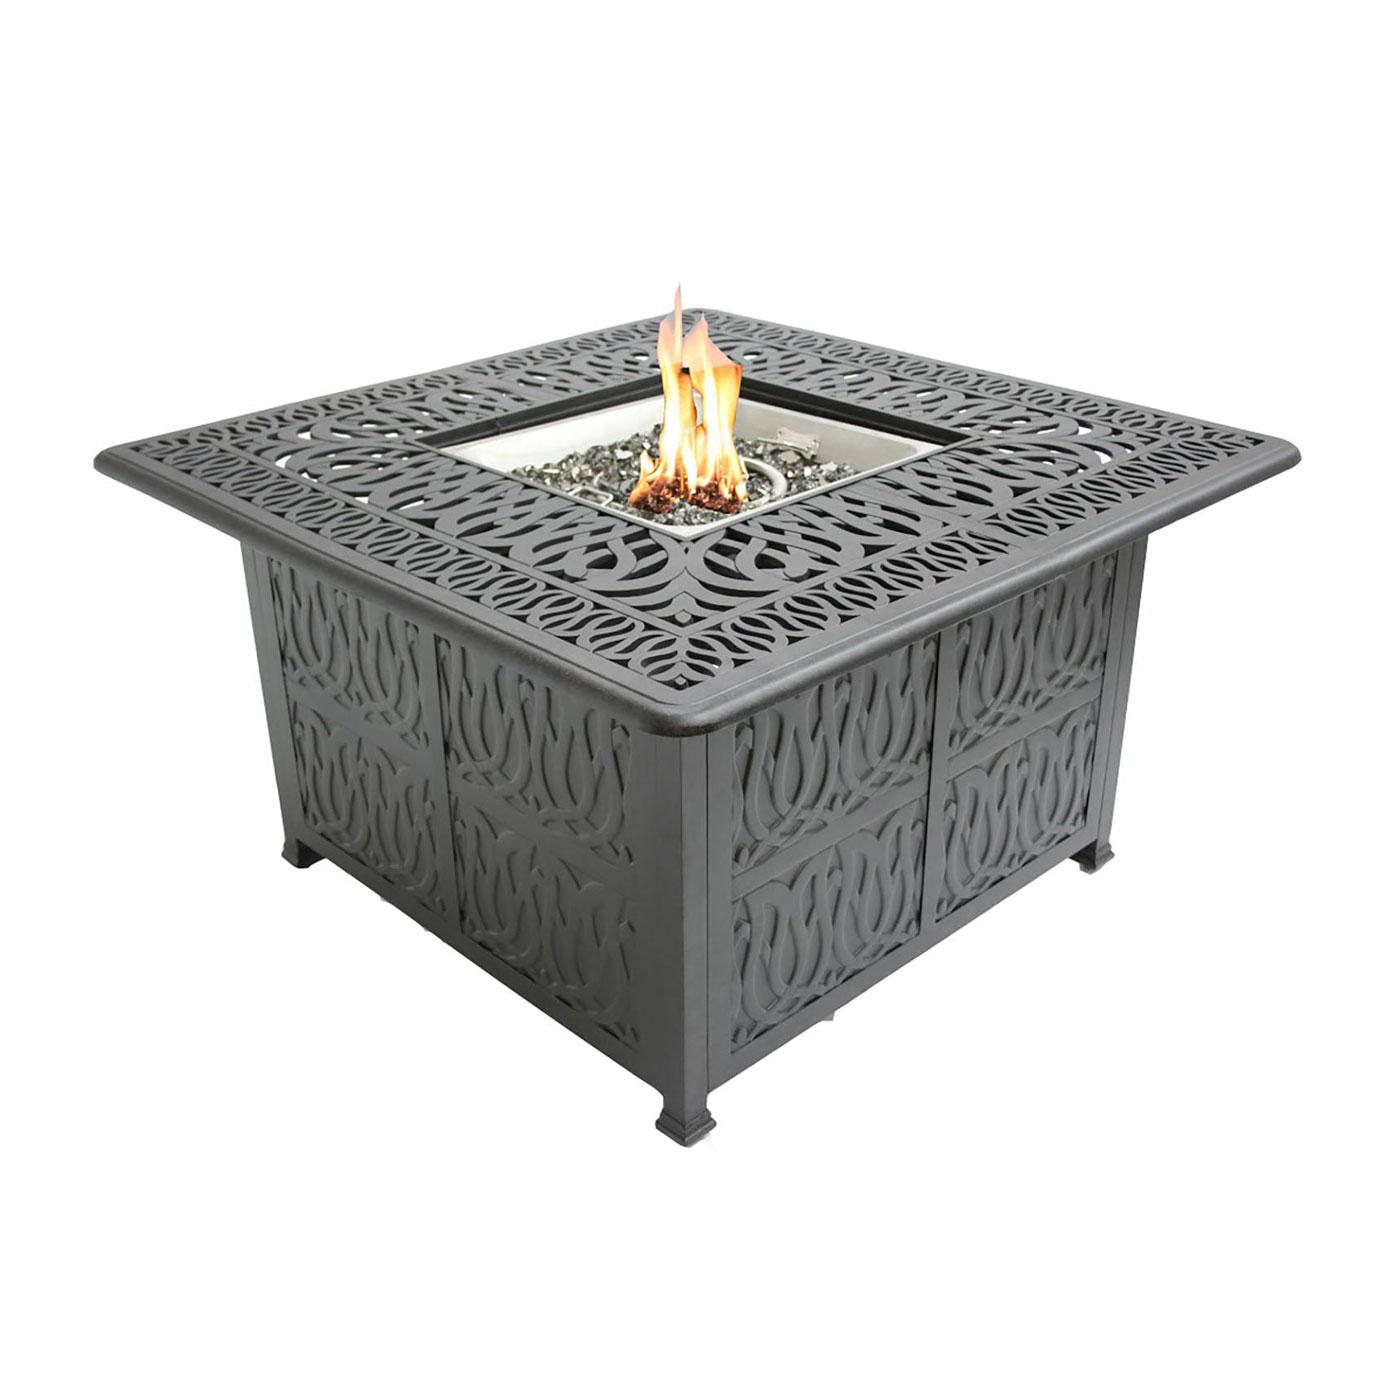 44" Square Chat Wrap Firepit Table Signature (Burner or Ice Bucket Optional)